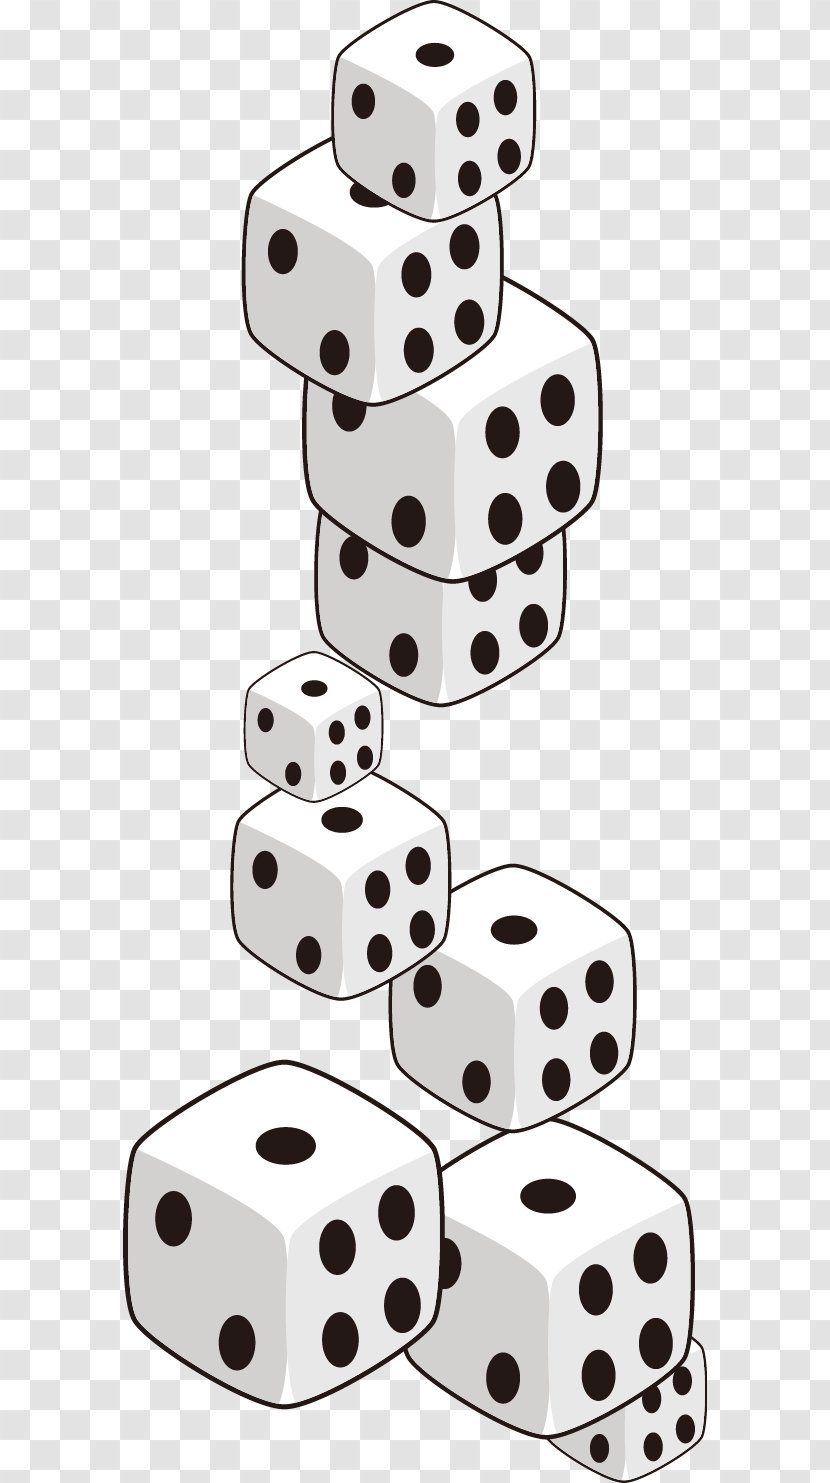 Dice Game - Vector Pattern Buckle Free Transparent PNG